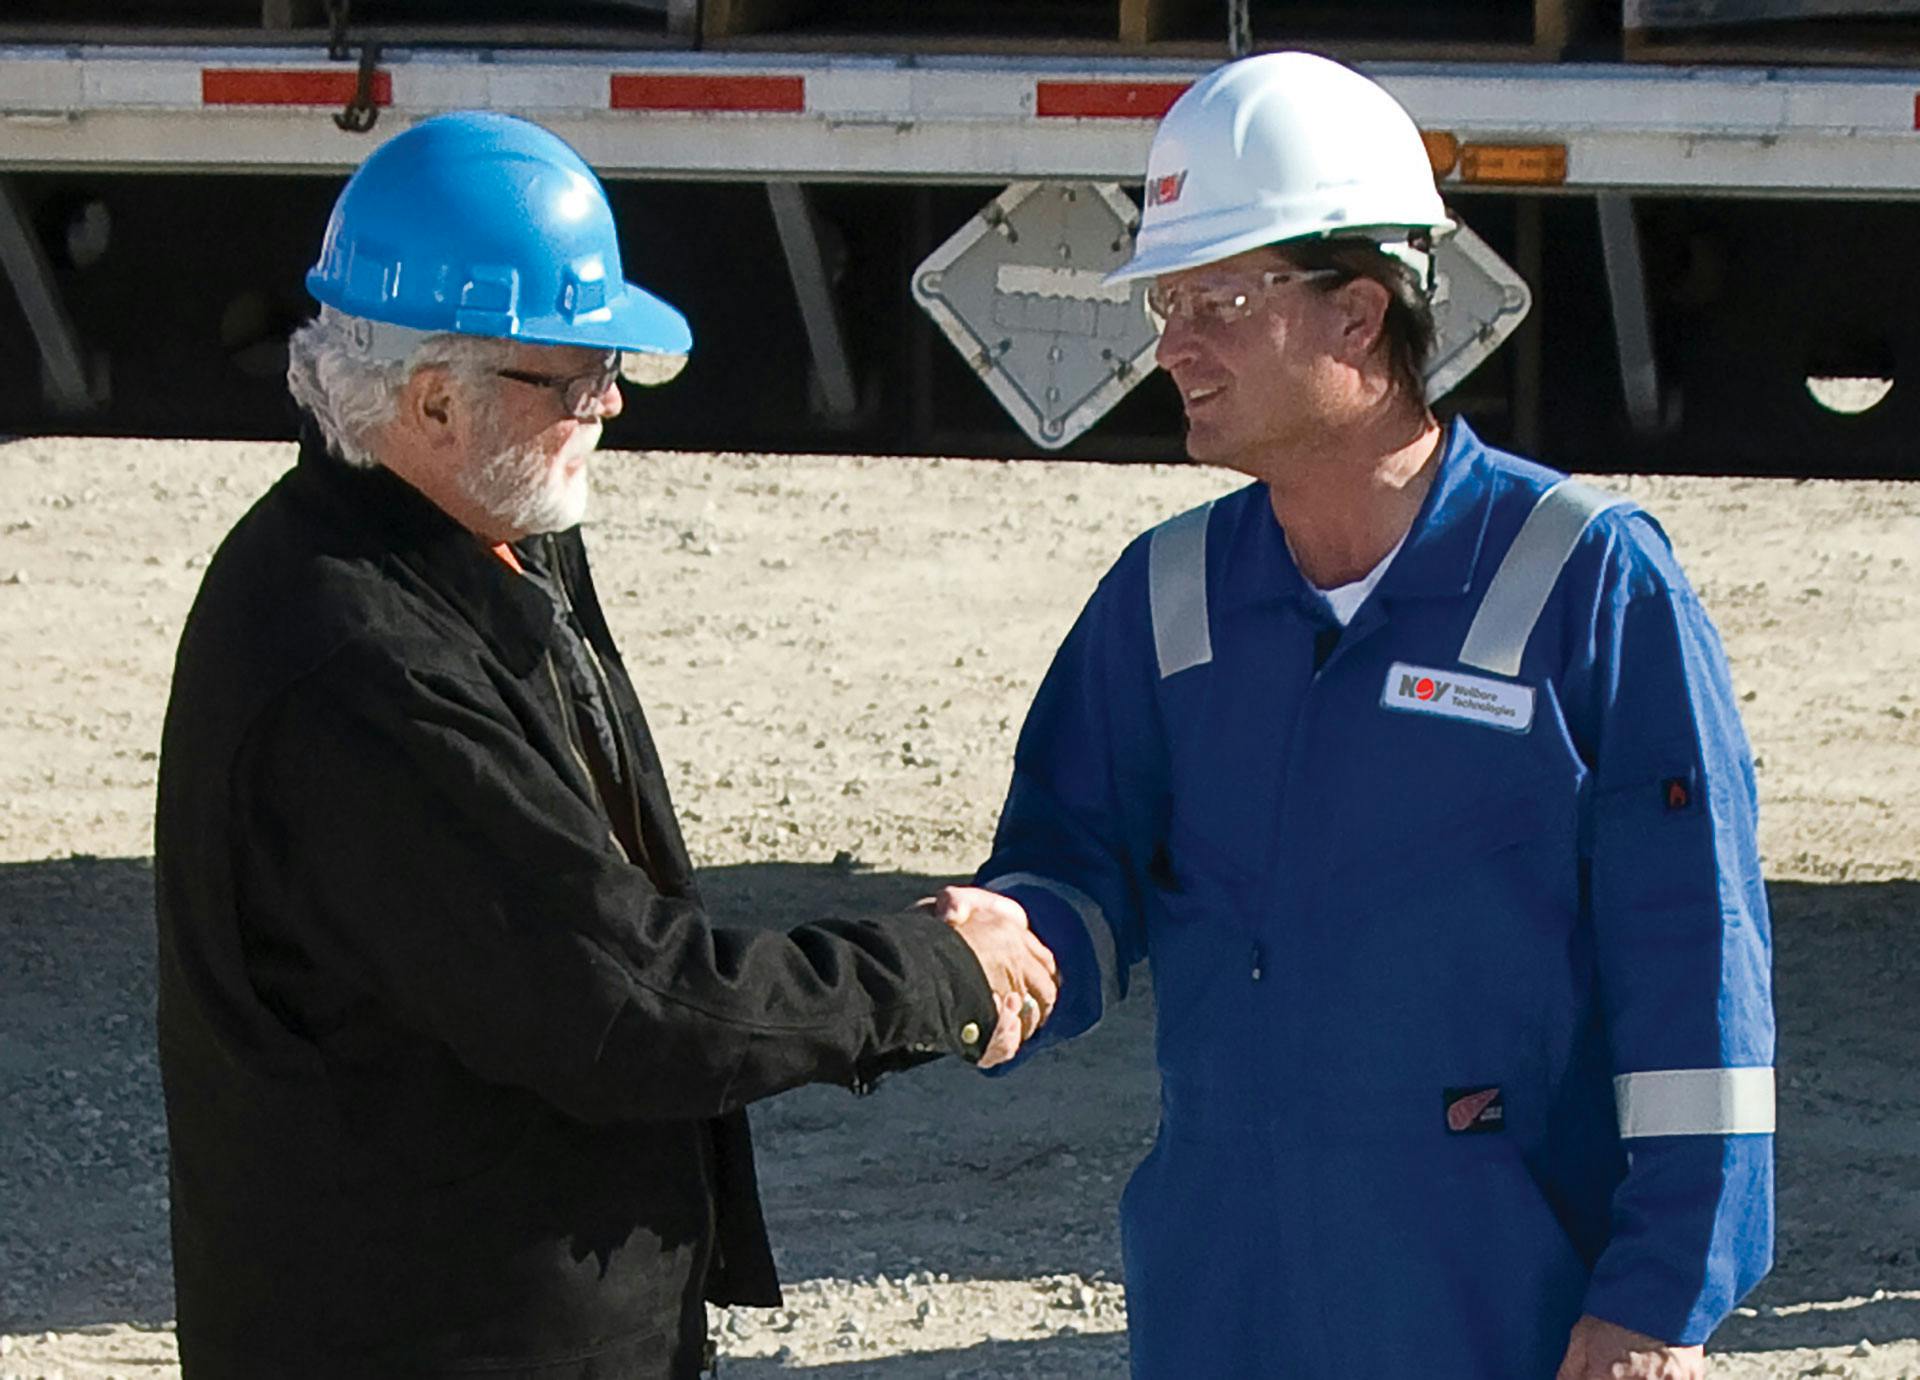 Power Generation Solutions technician shaking hands with a client